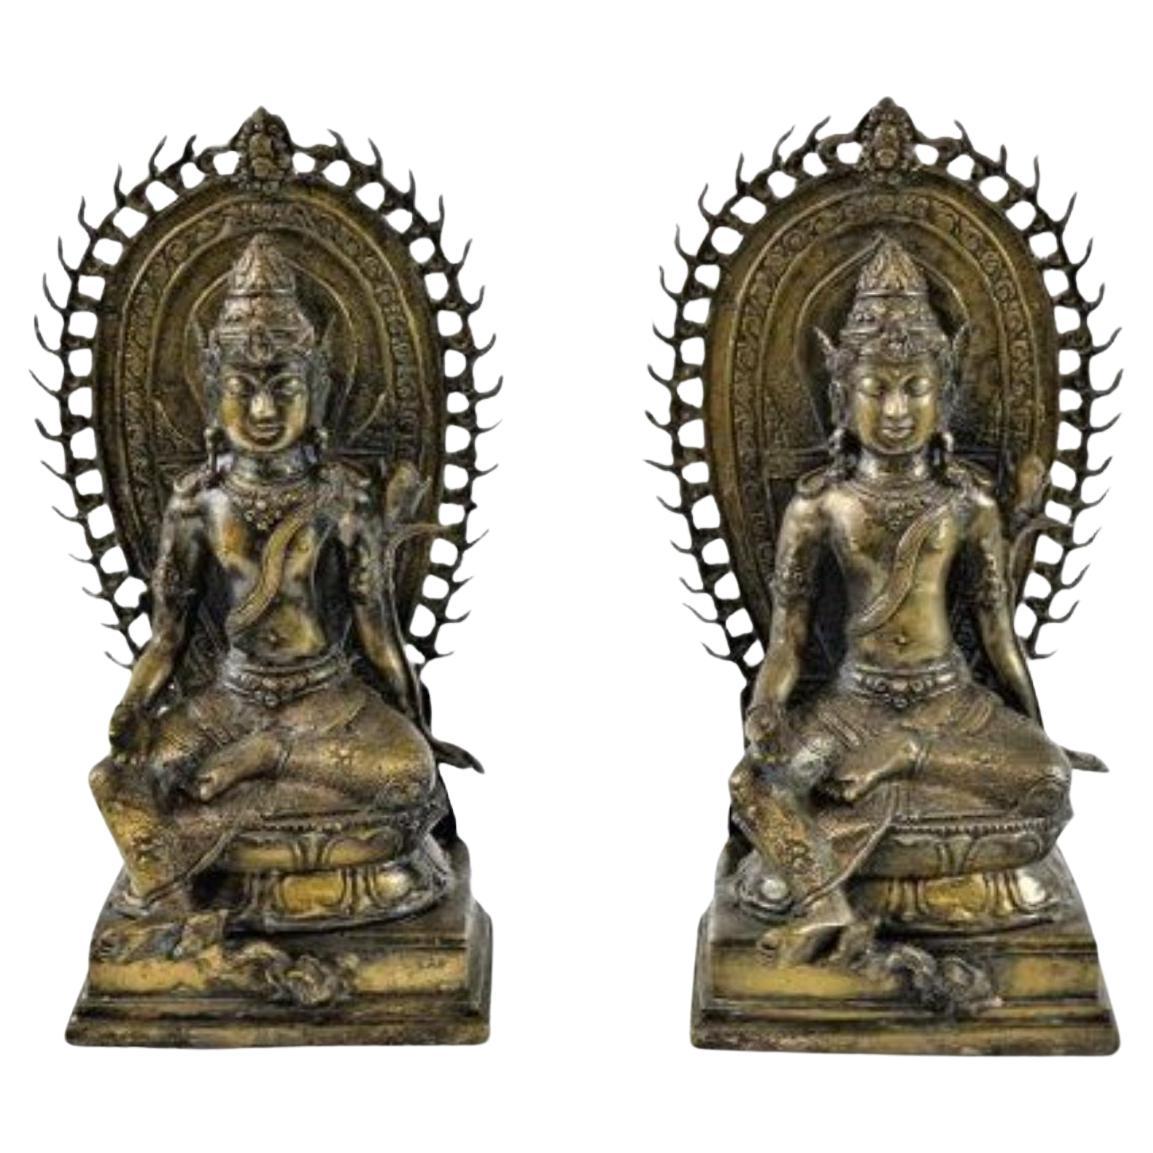 Pair of Antique Seated Southeast Bronze Buddhas